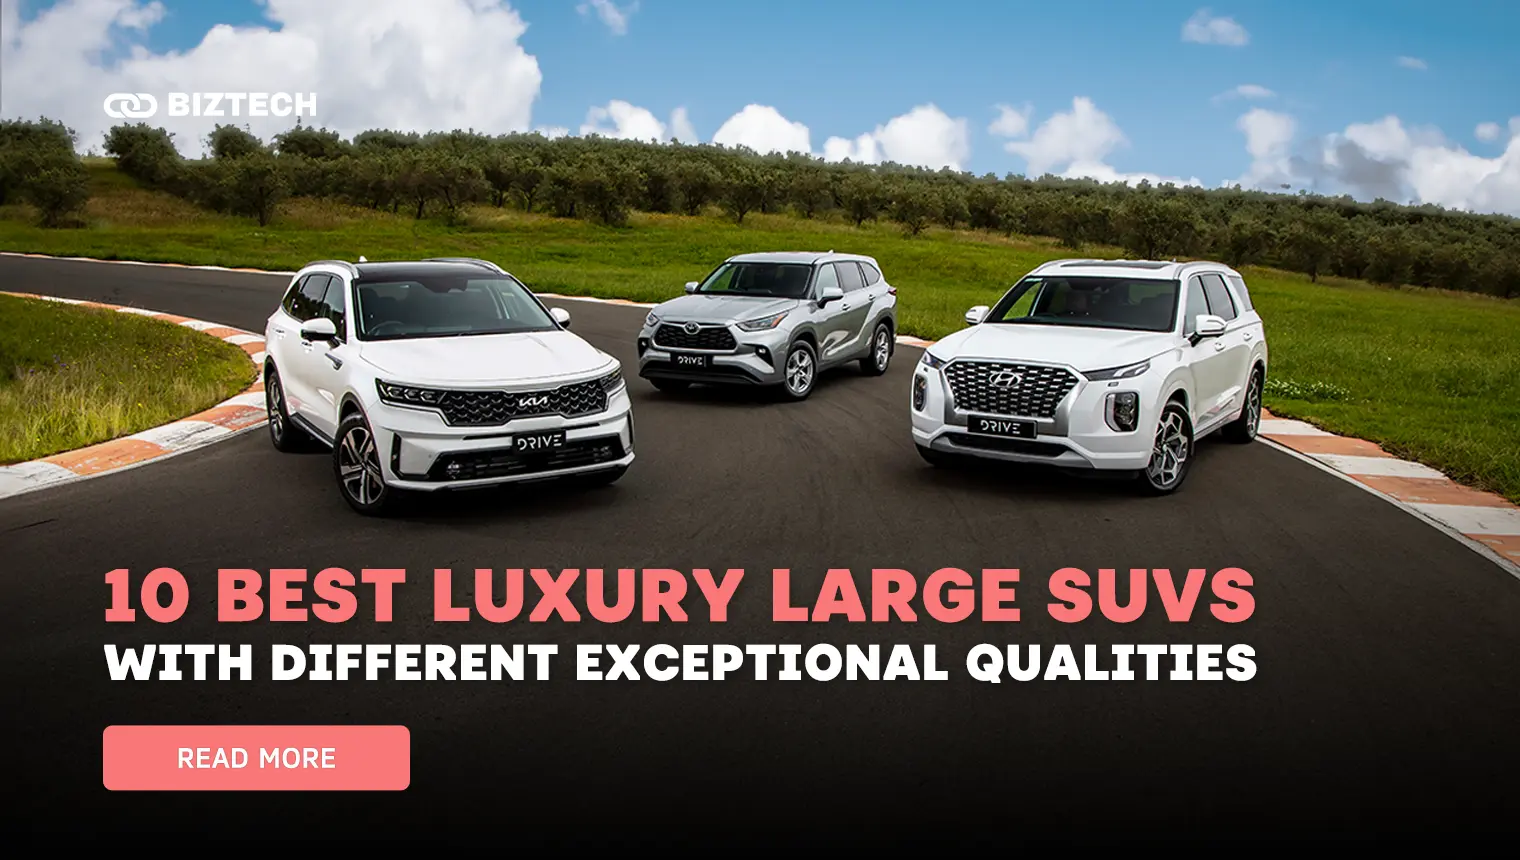 10 Best Luxury Large SUVs With Different Exceptional Qualities